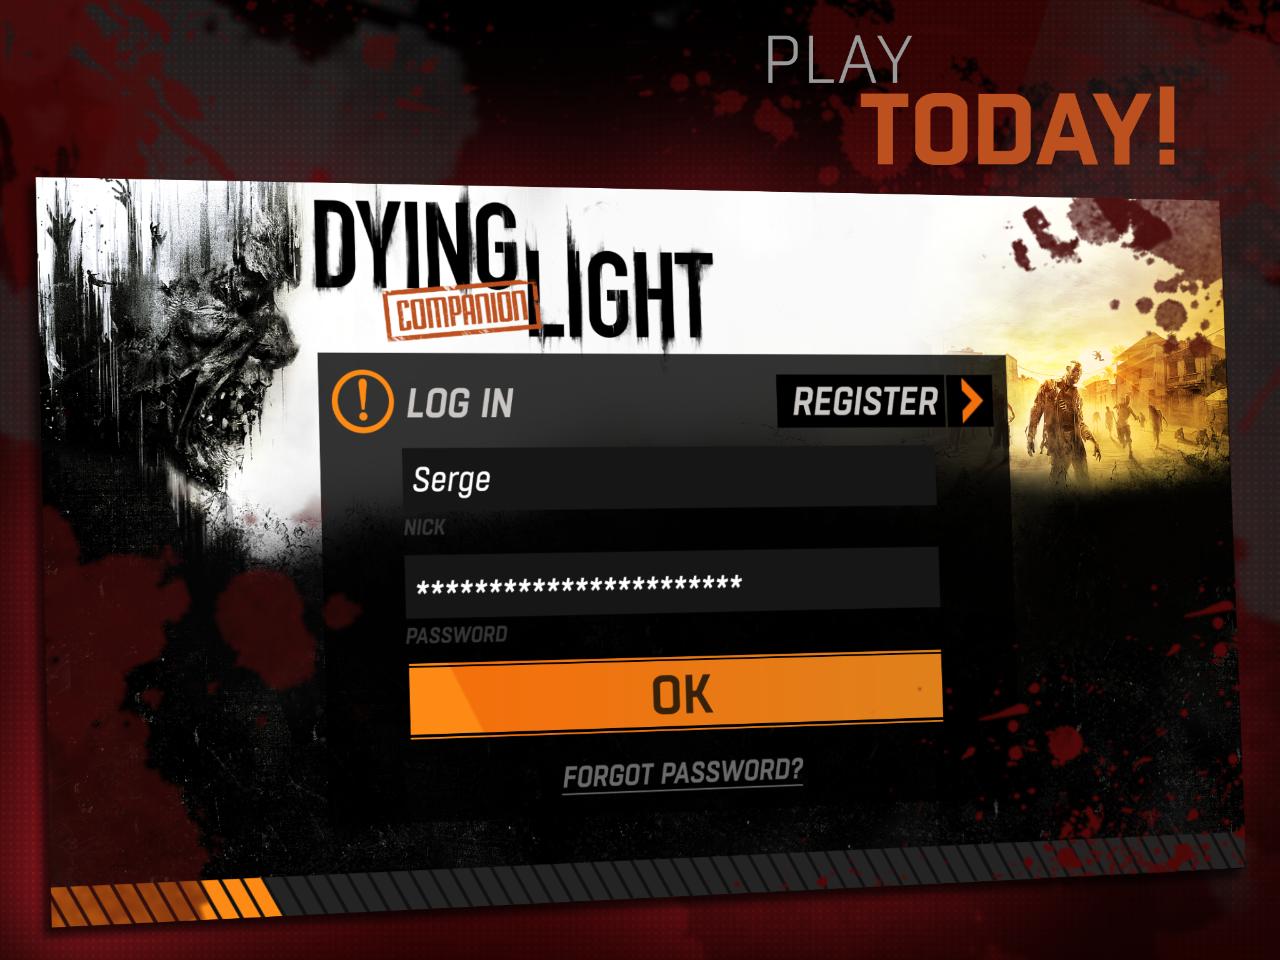 Companion For Dying Light For Android Apk Download - is roblox dying 2019